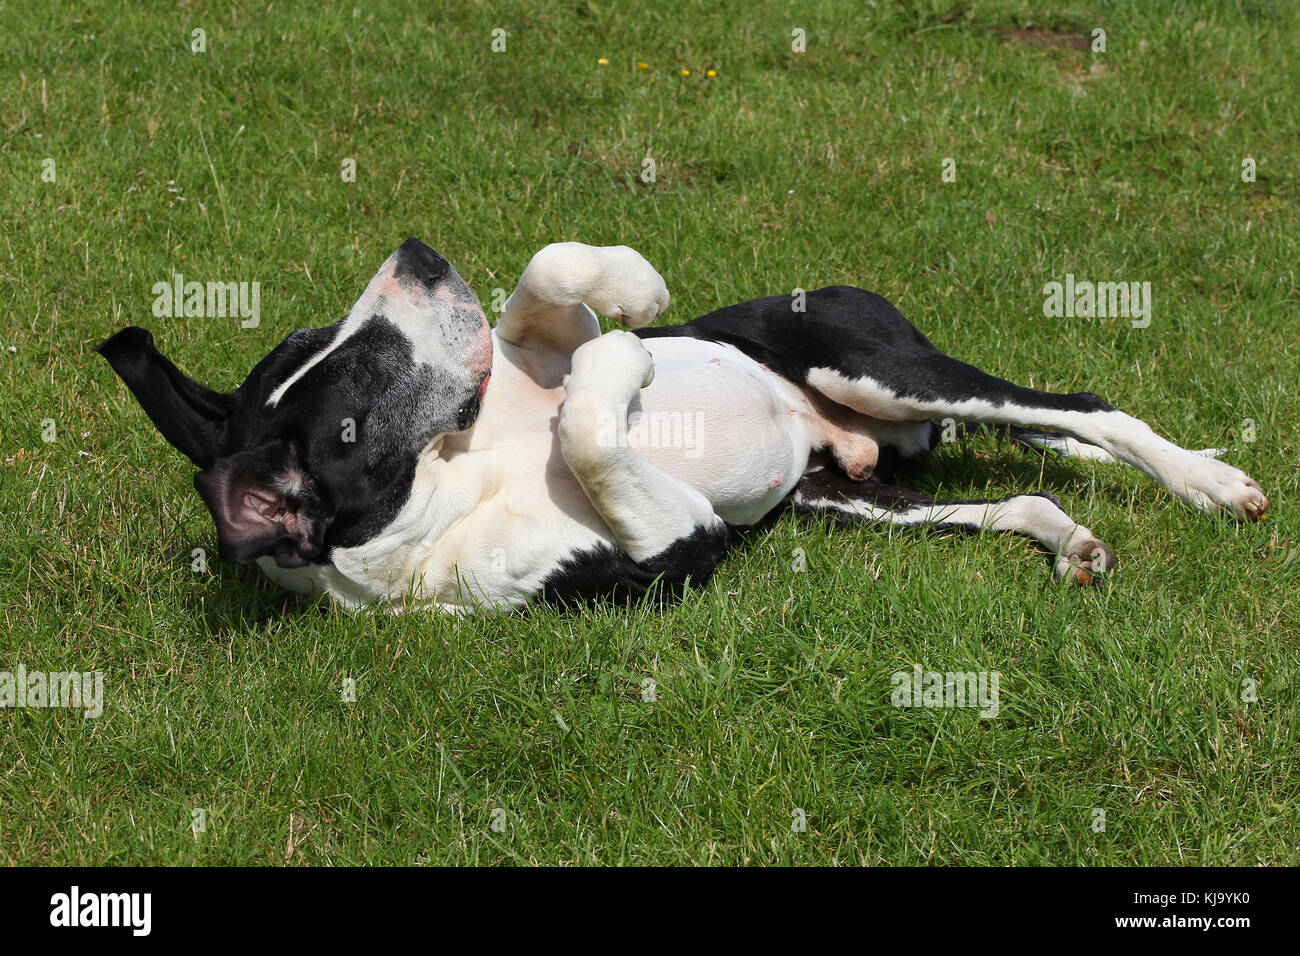 Great Dane German Mastiff Deutsche Dogge lying on grass on back with front paws curled up Stock Photo